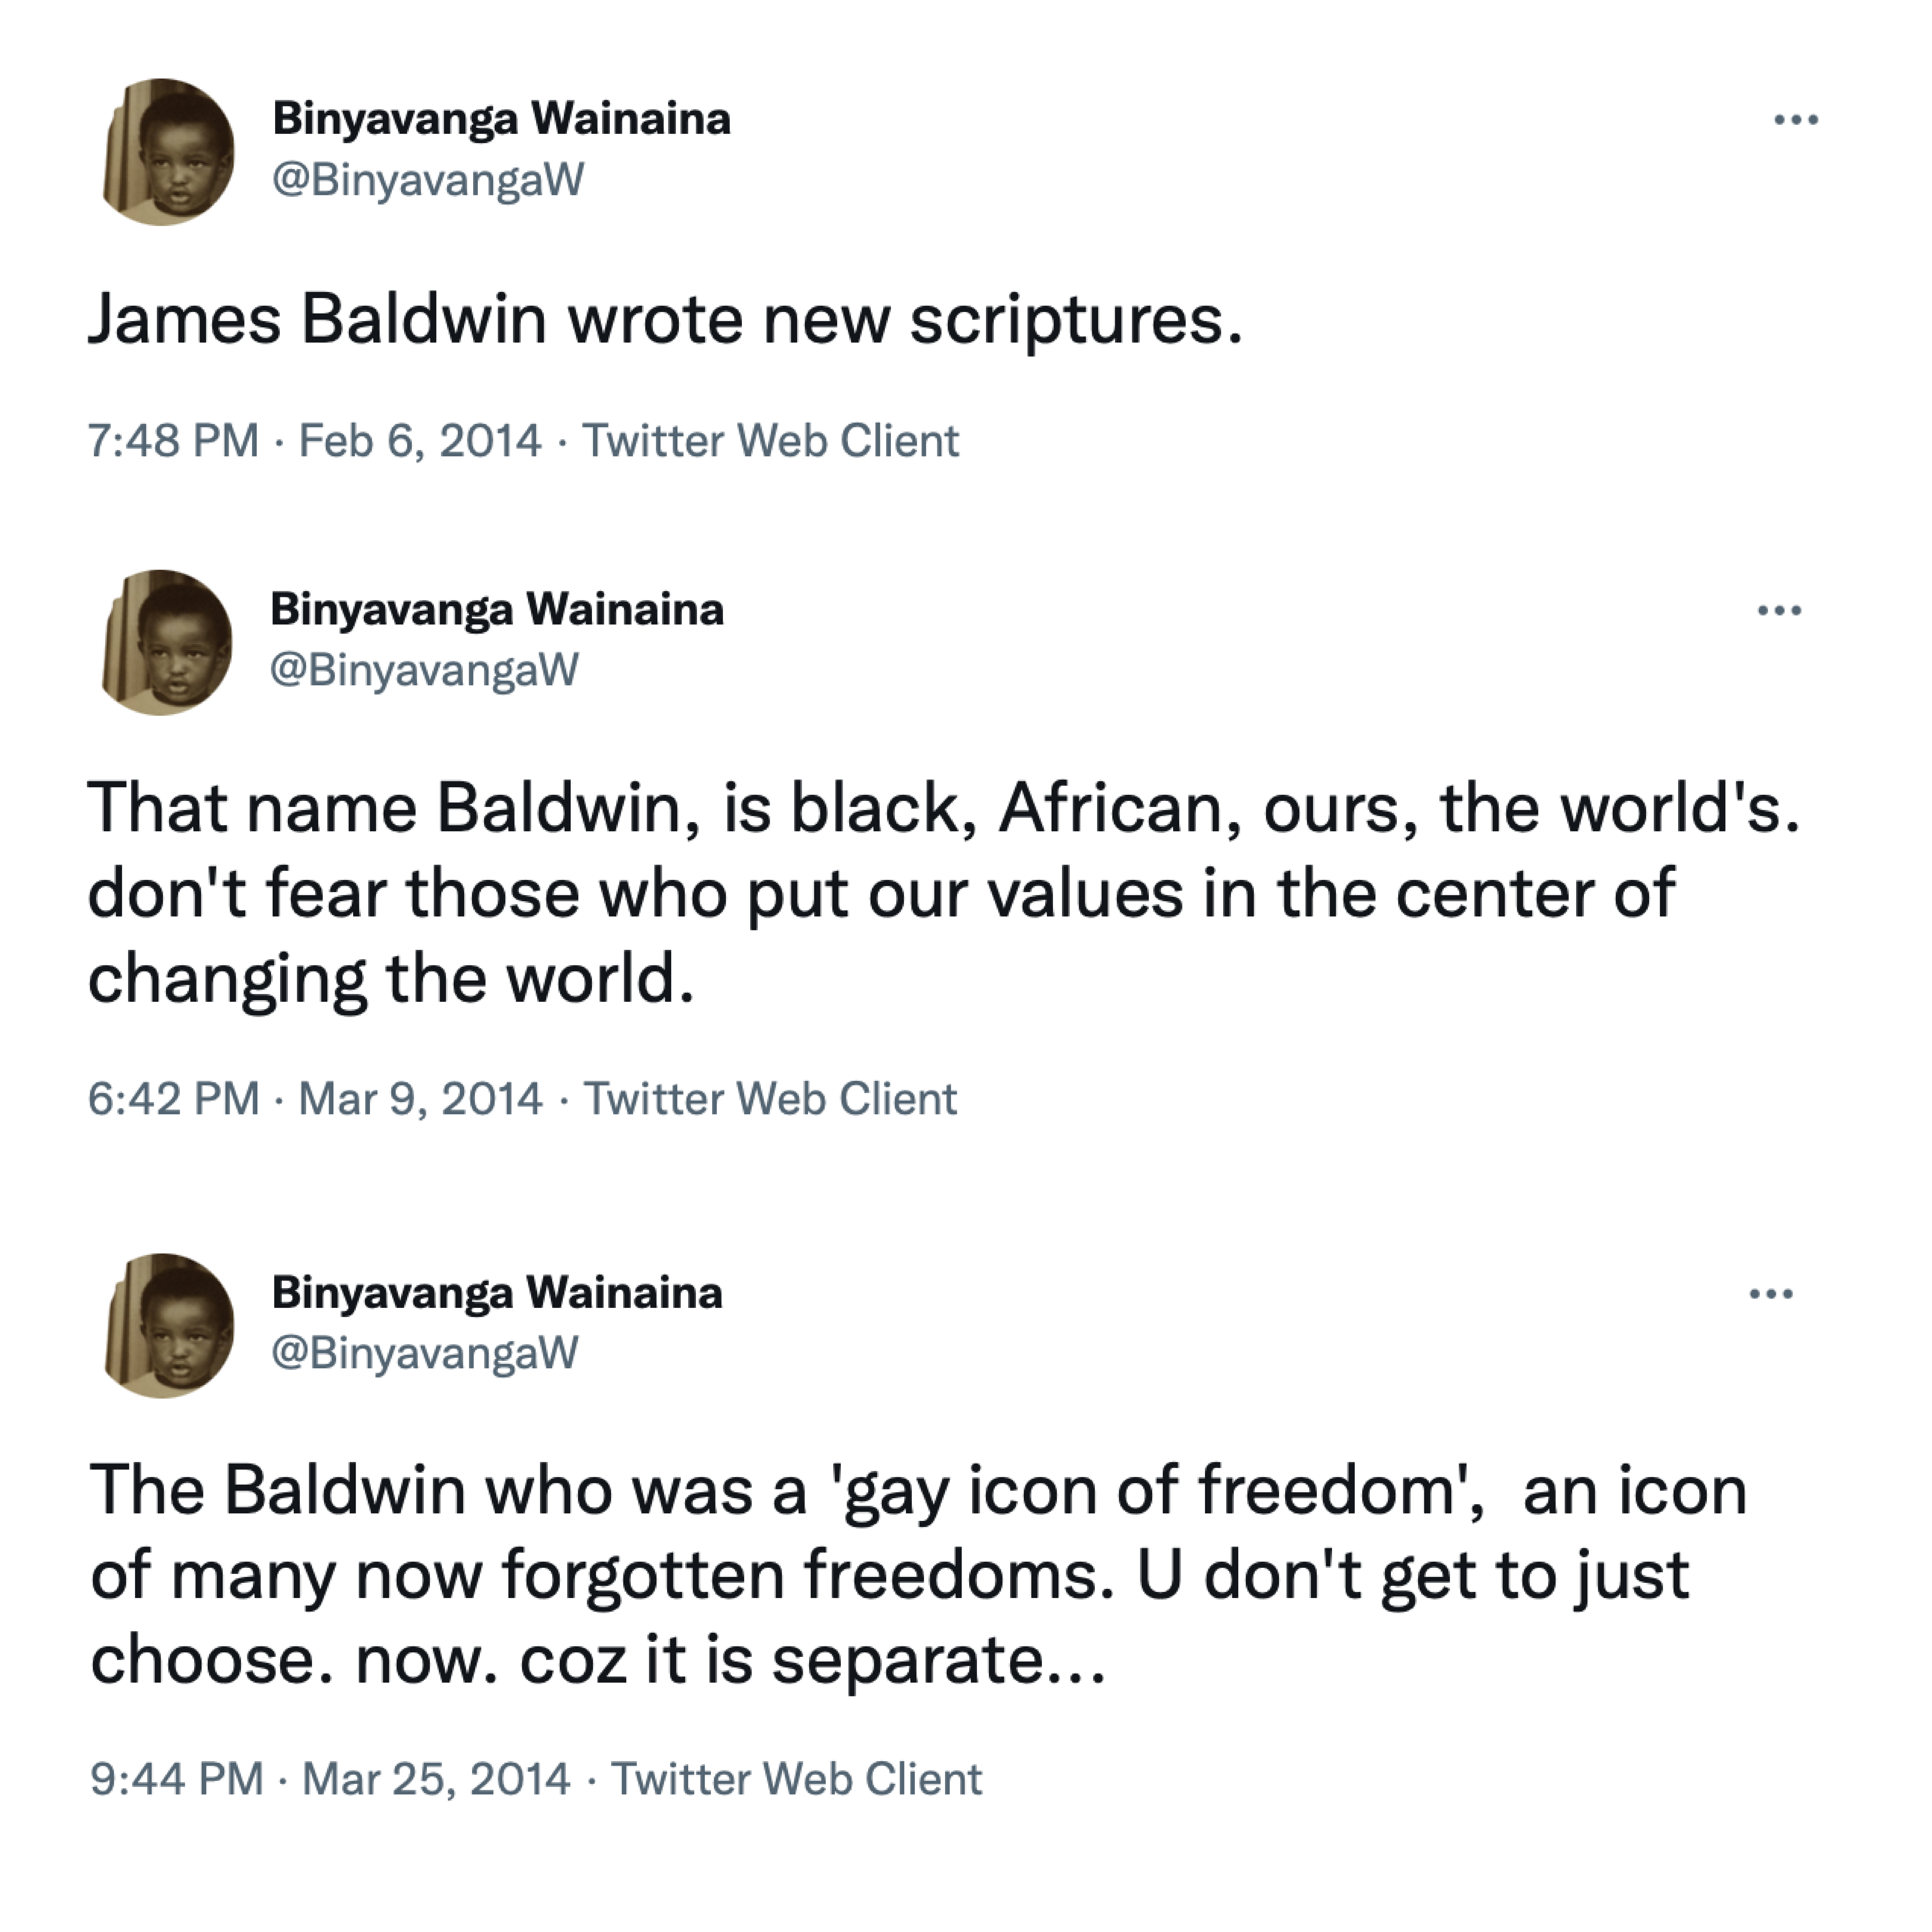 Image of tweets on Twitter talking about James Baldwin.